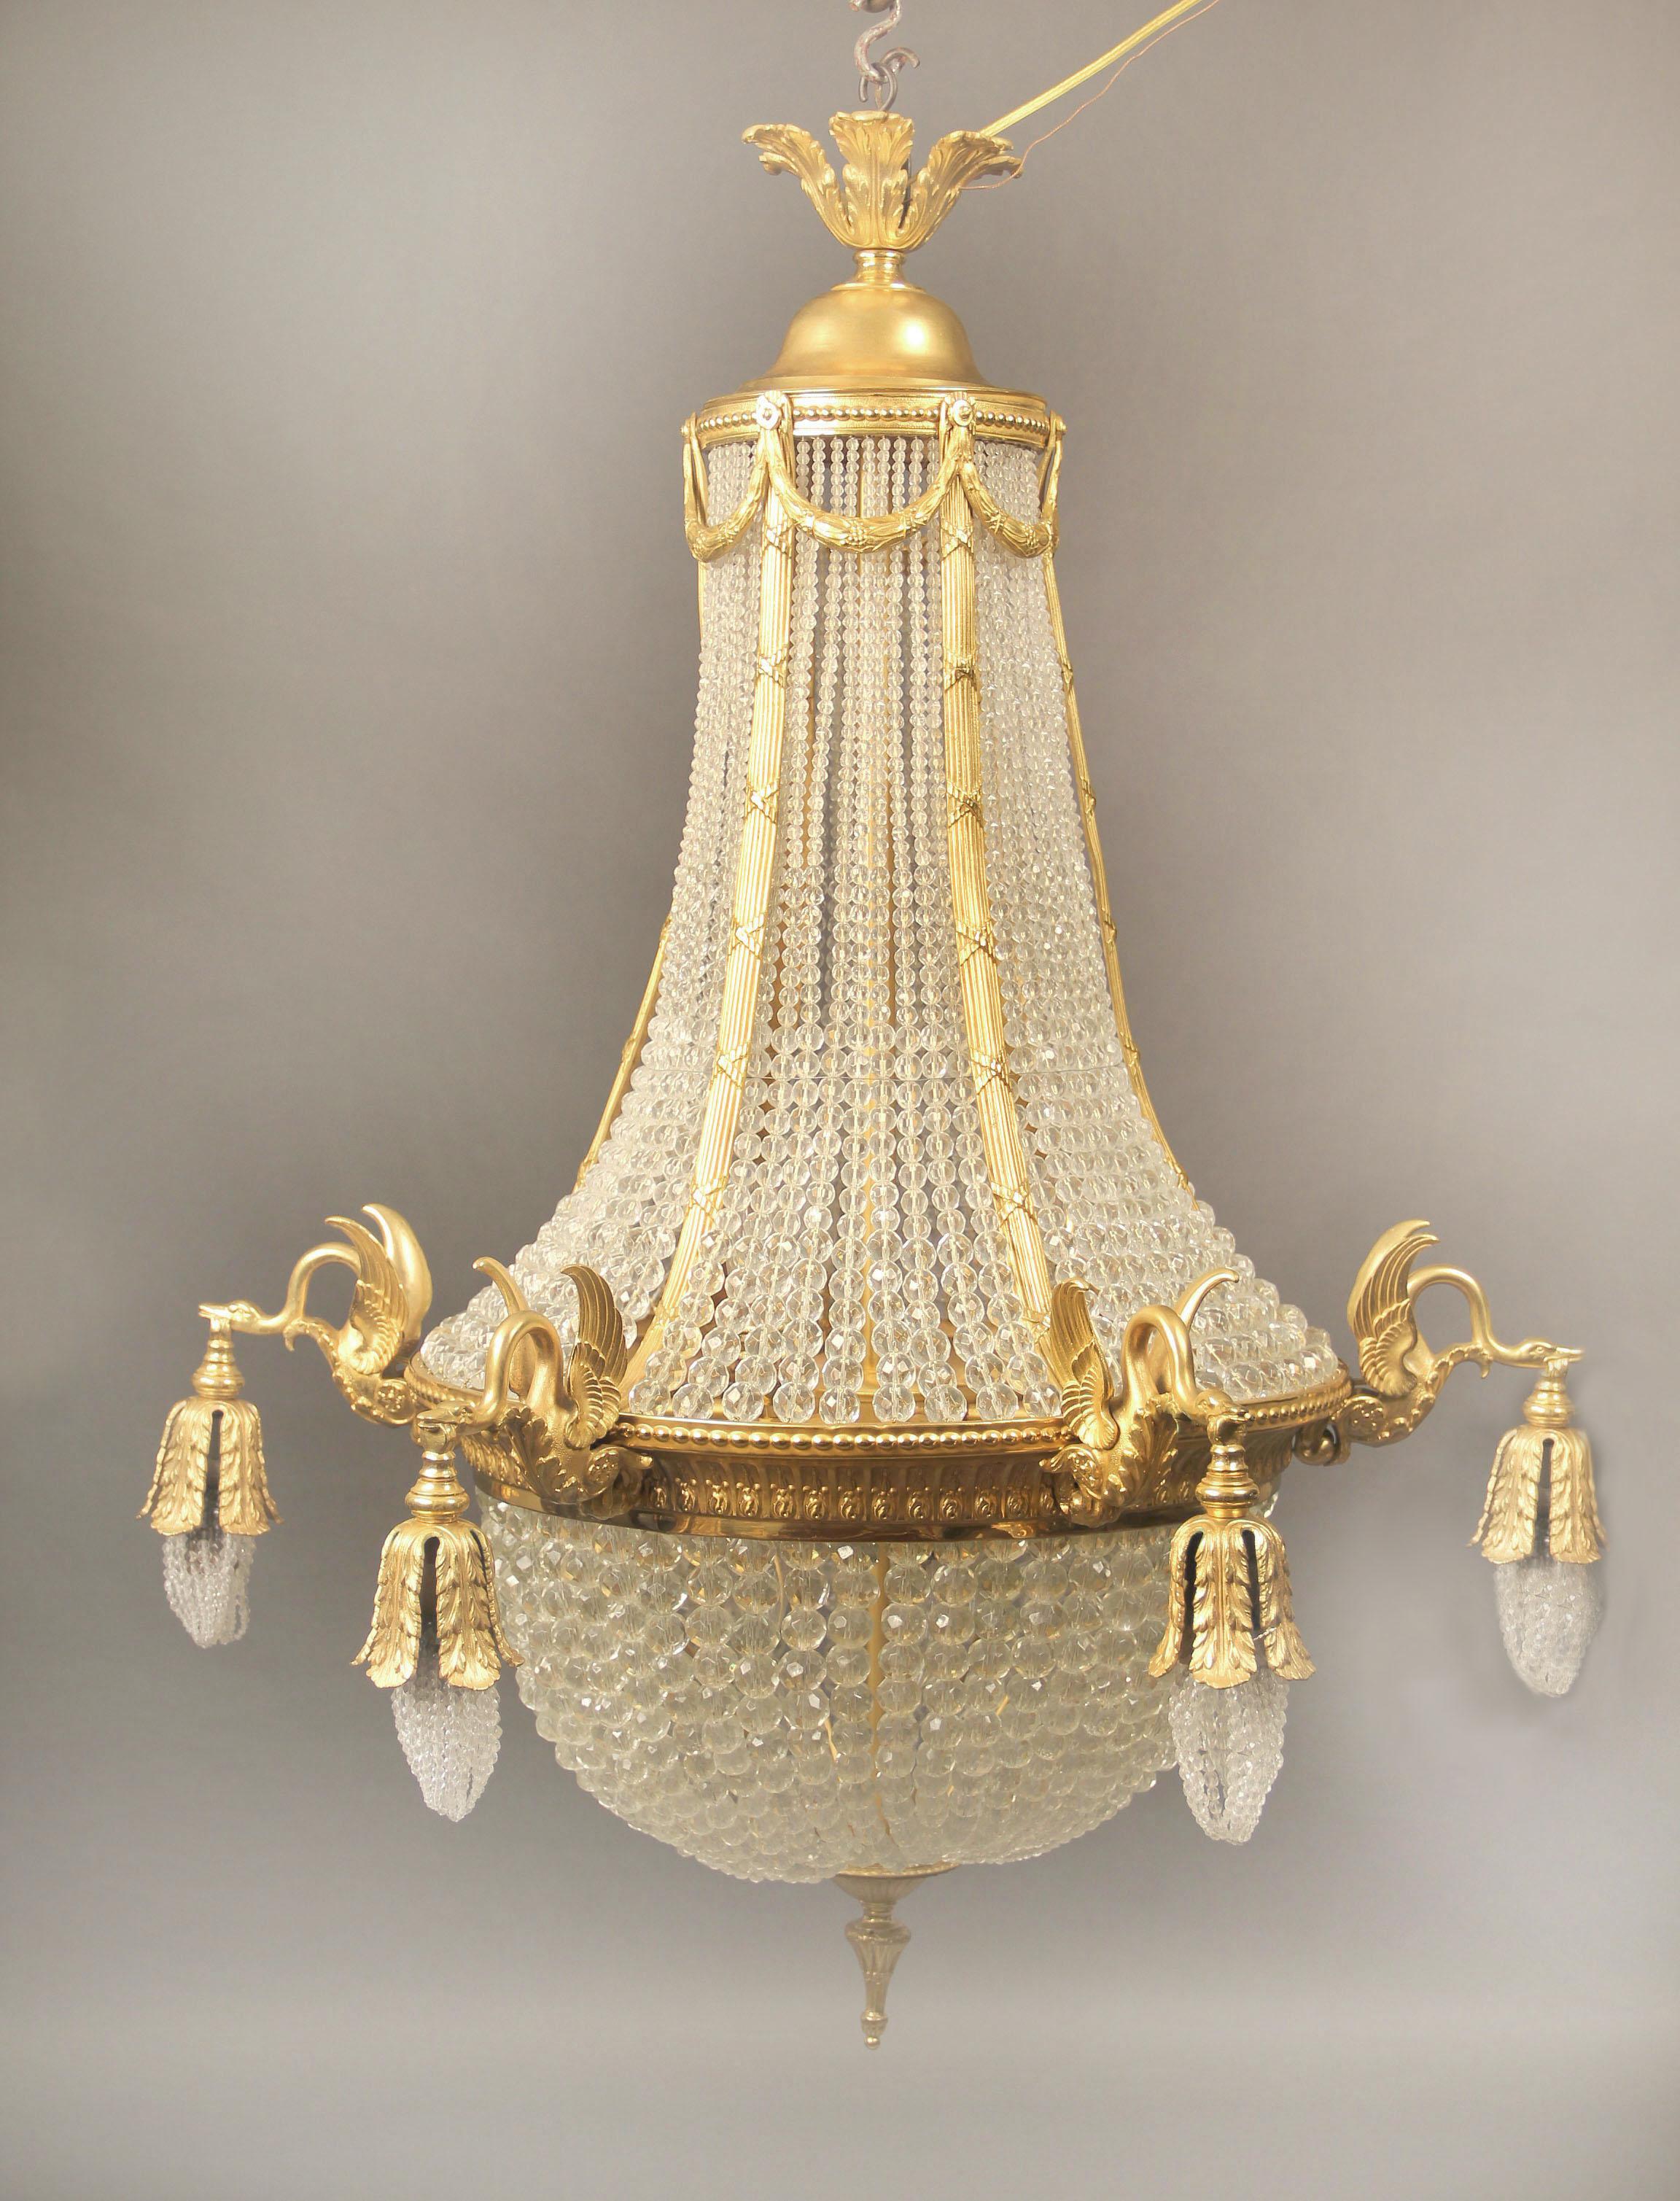 Late 19th/Early 20th Century Gilt Bronze Beaded Basket Twelve Light Chandelier

The upper and lower part of the cage connected by ribbed bronze straps, the straps connected by bronze wreaths, six perimeter lights each held by a swan, six interior